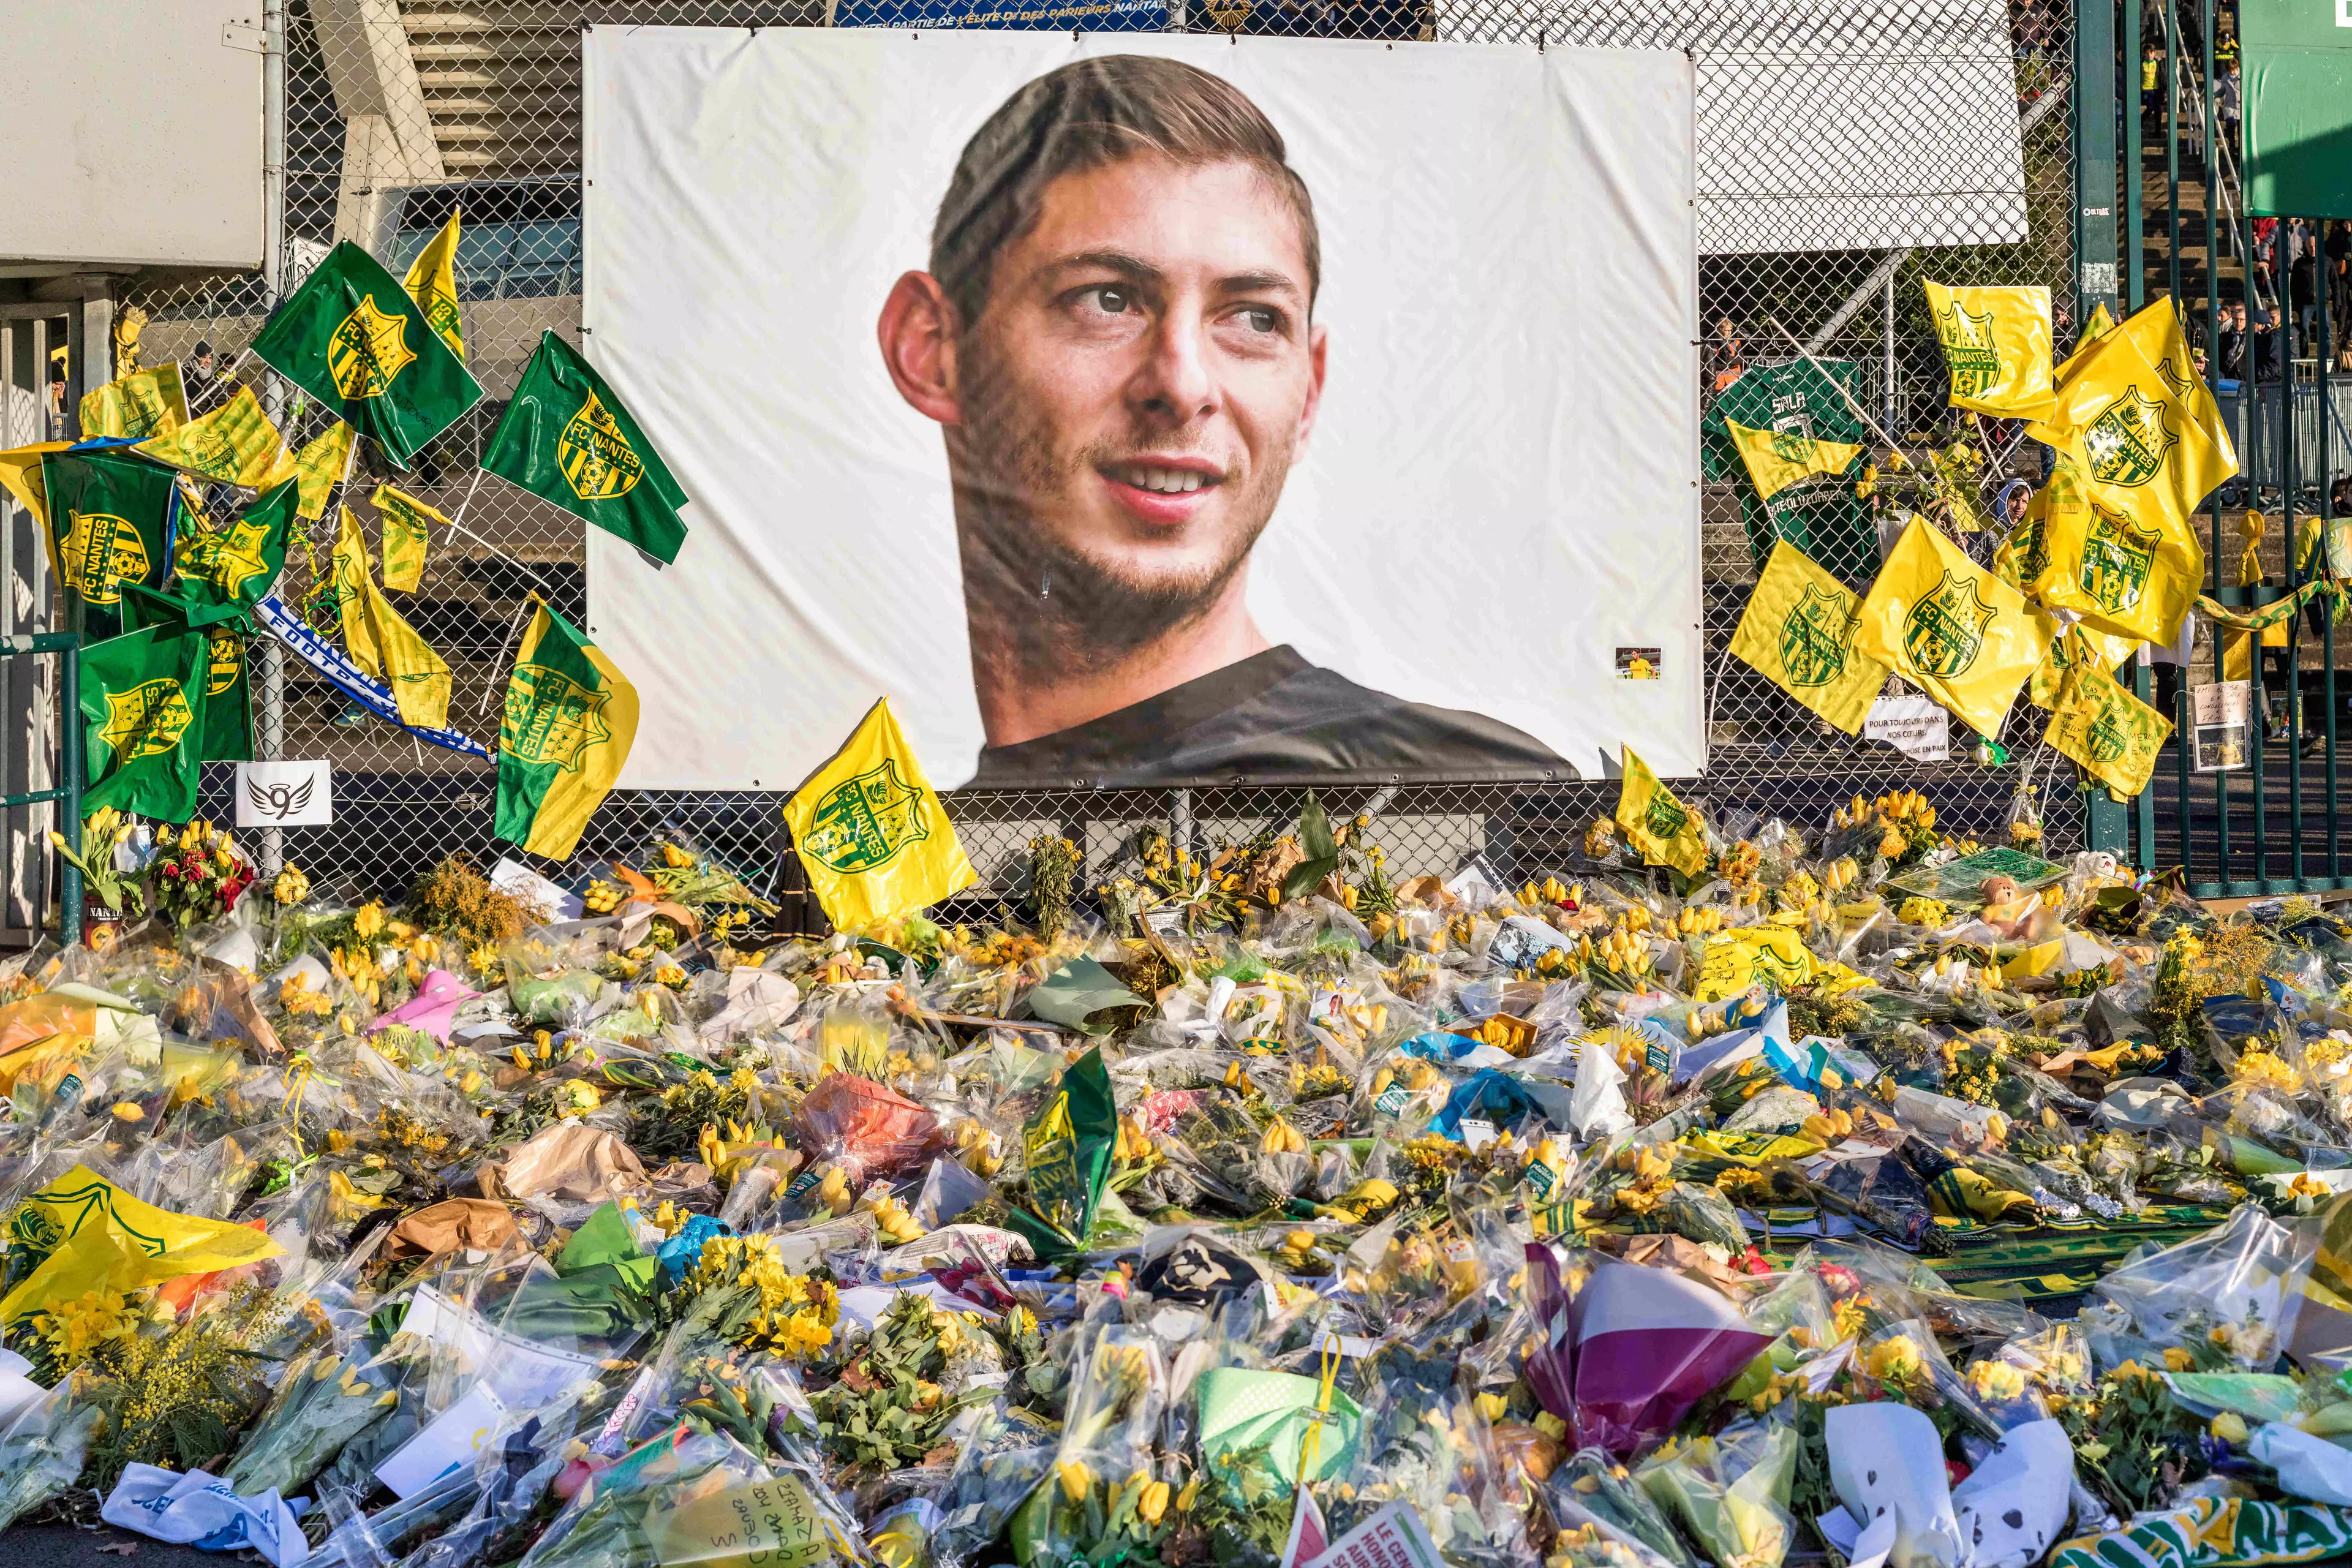 Fans flocked to football stadiums to pay their respects to the late footballer.